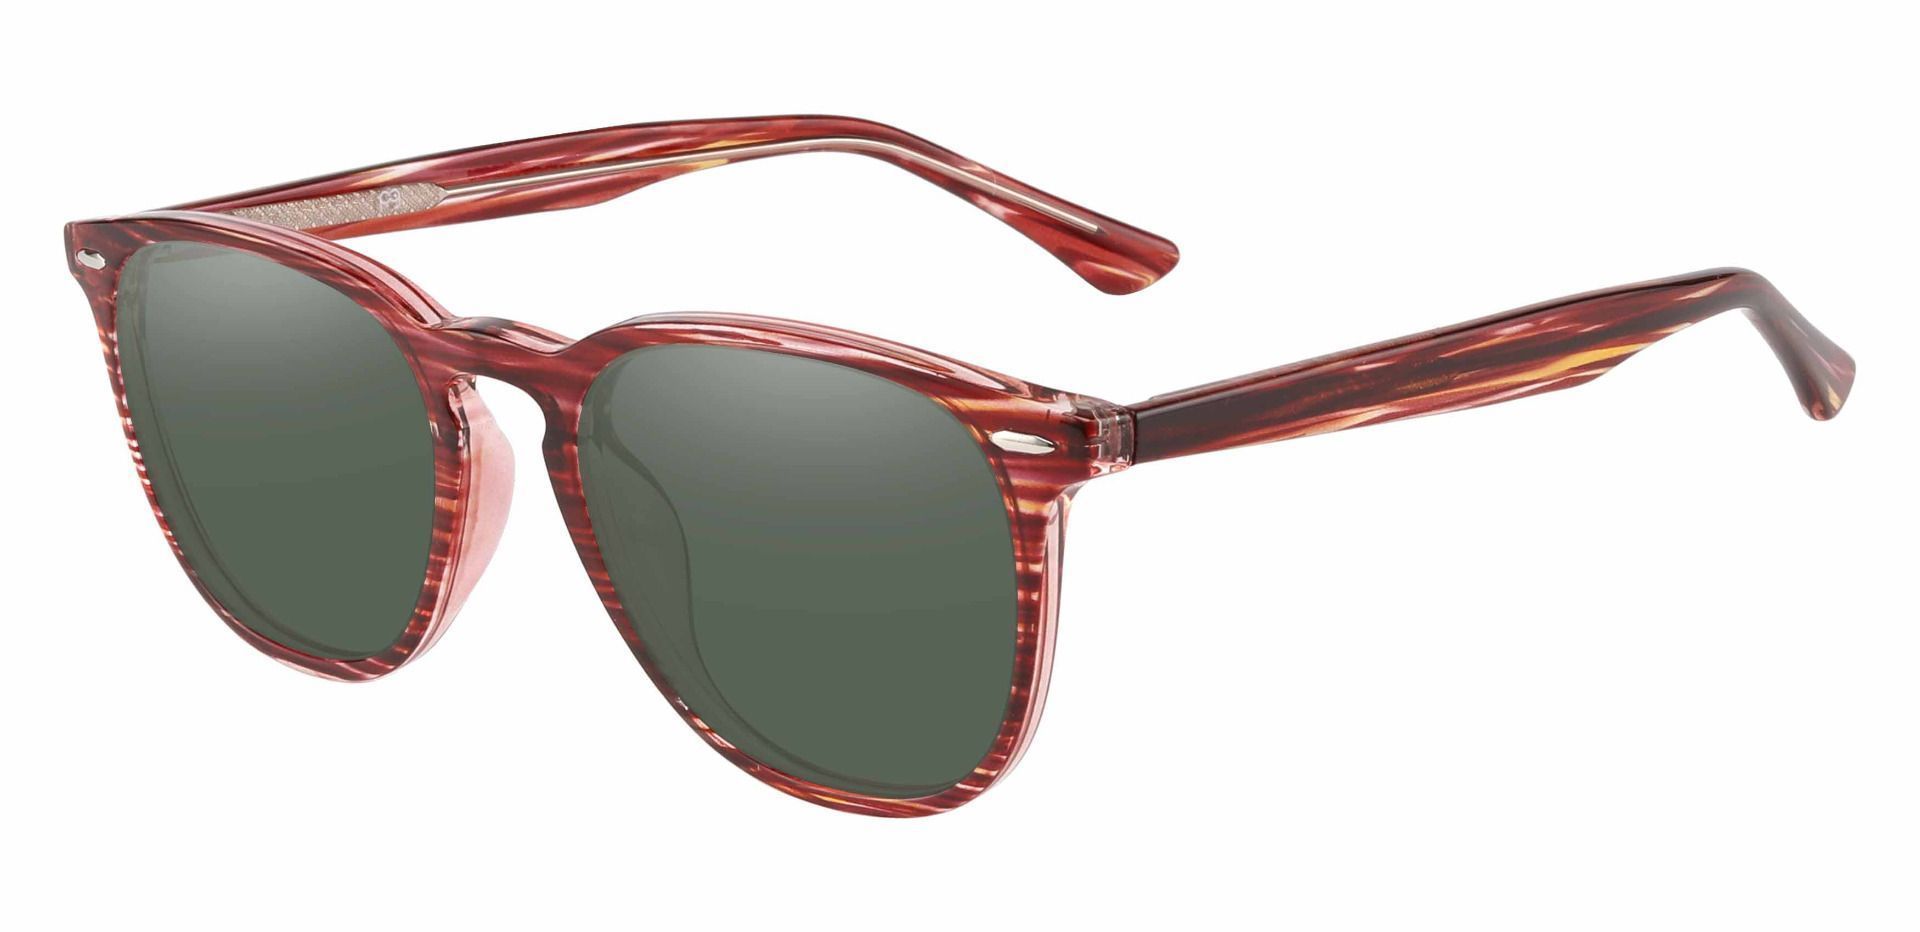 Sycamore Oval Reading Sunglasses - Red Frame With Green Lenses